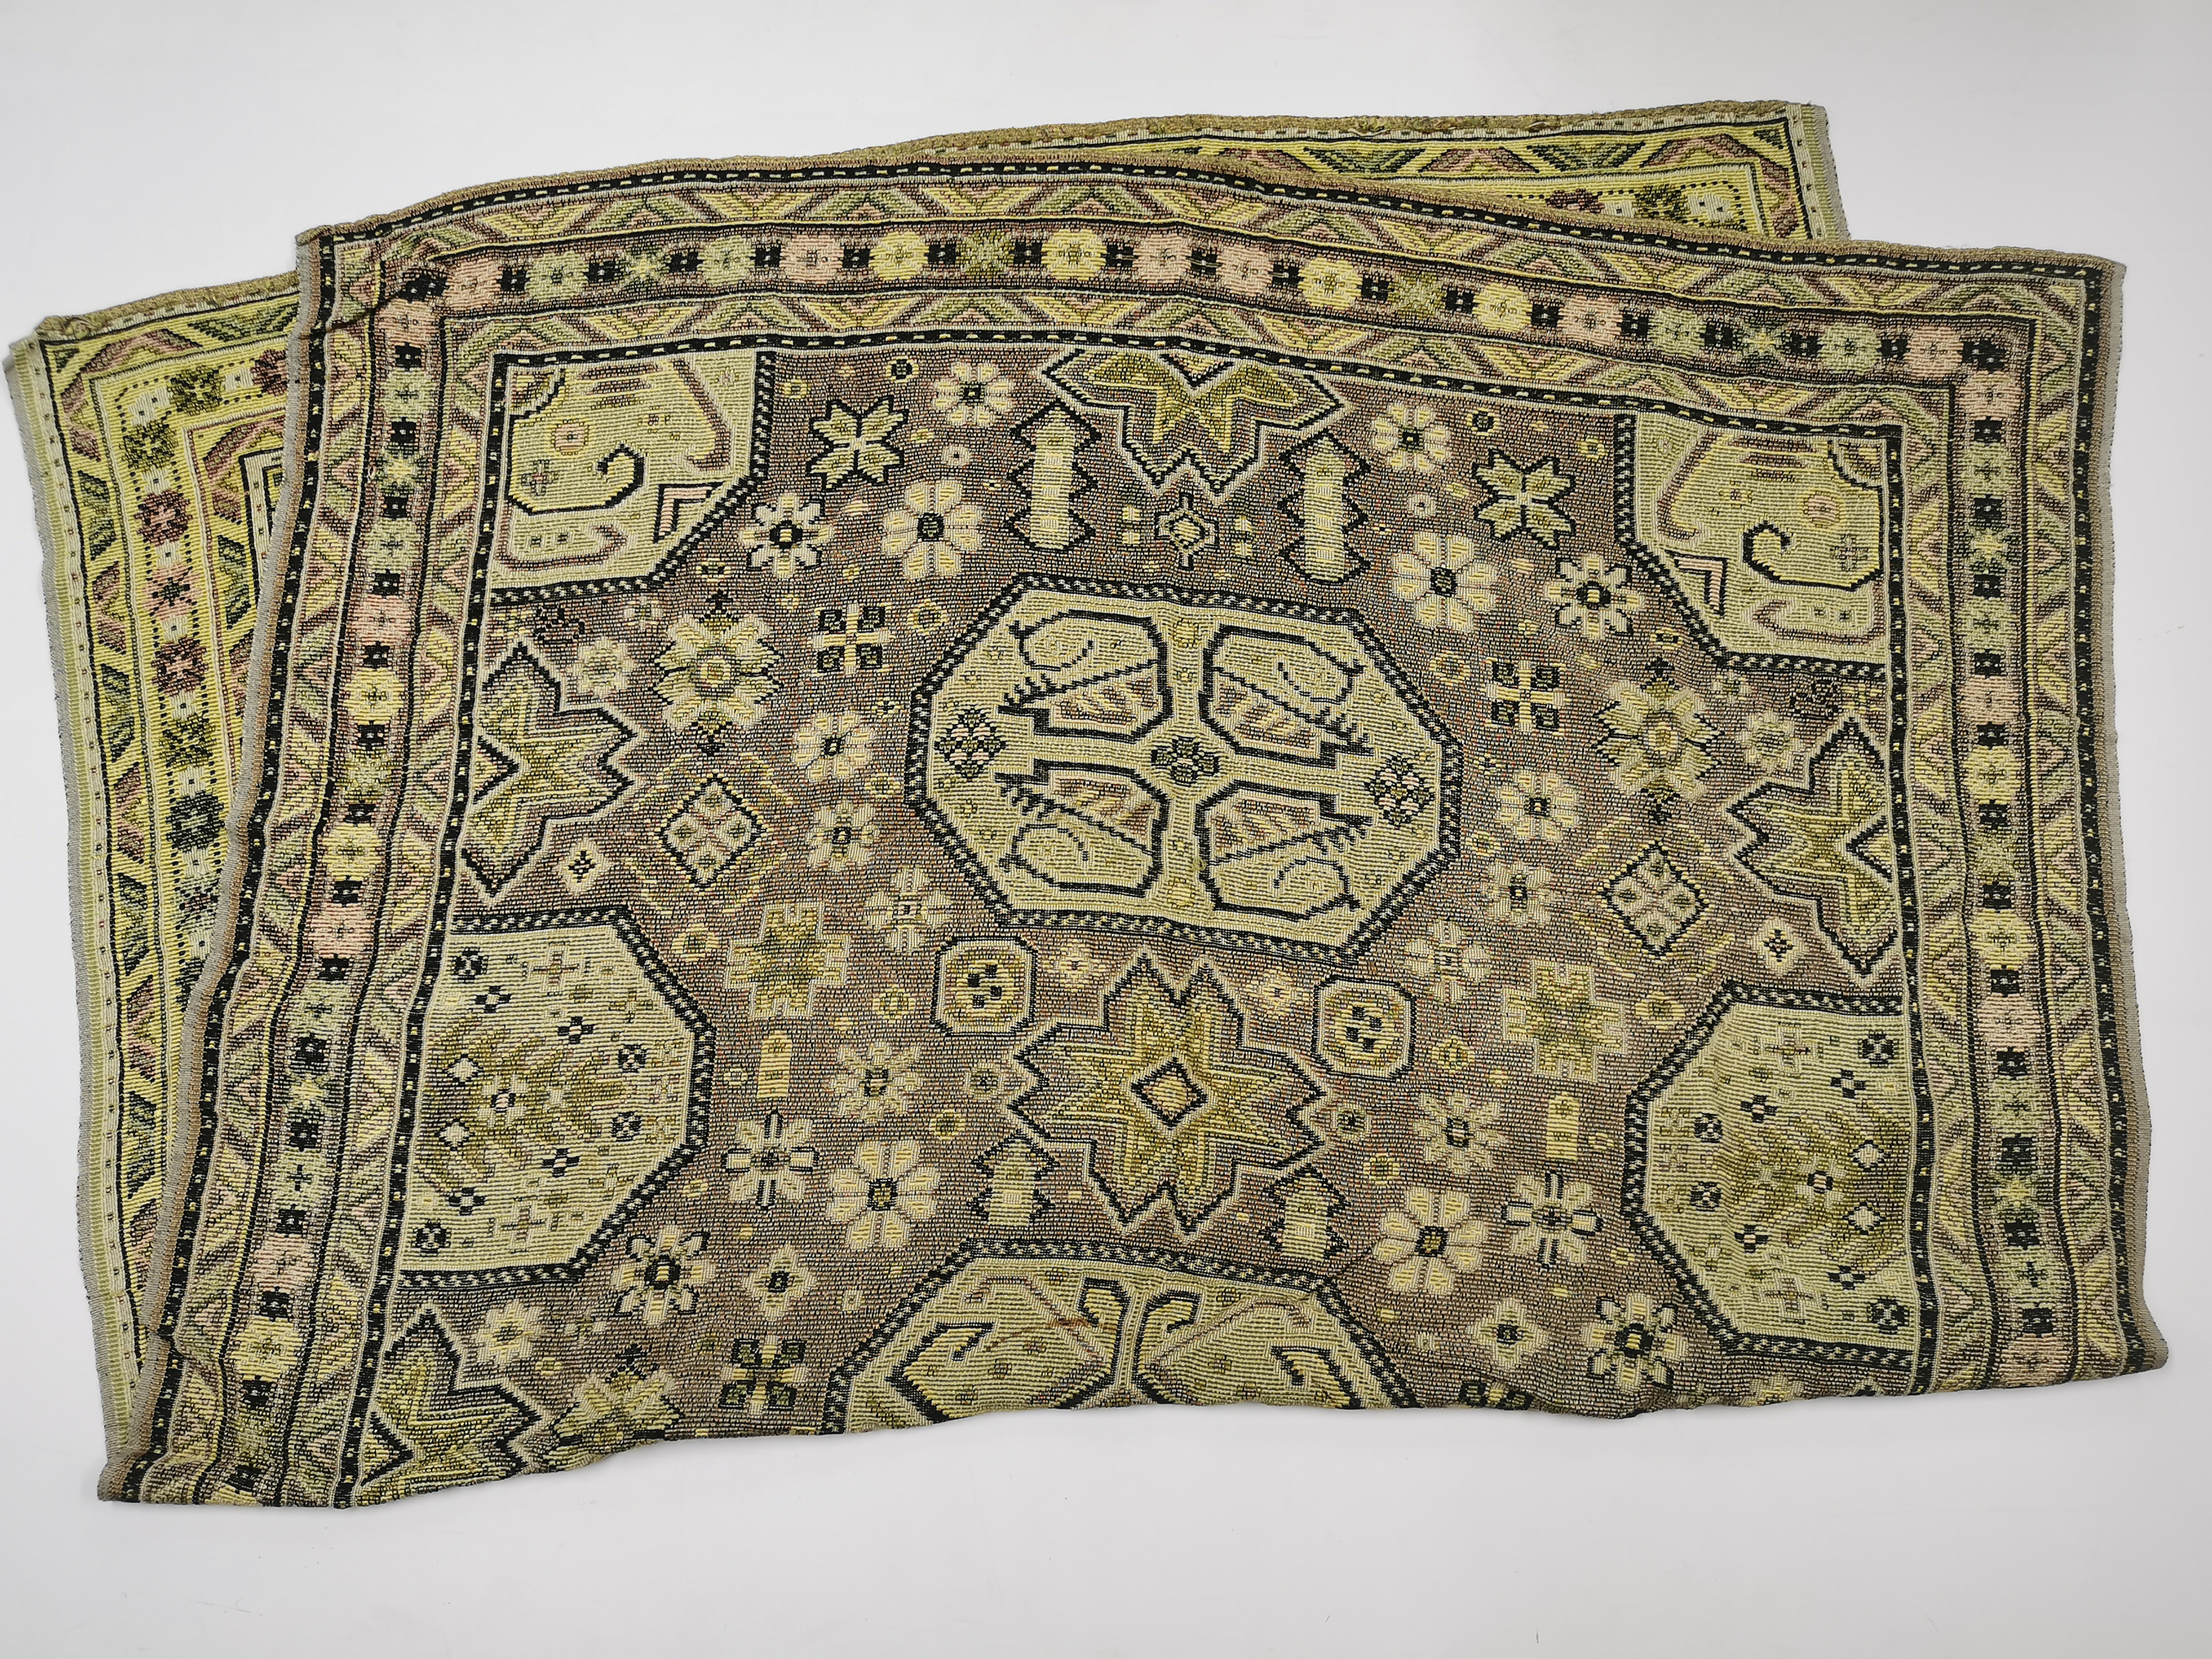 A continental table rug, 133 x 183cm. With another continental table rug, 146 x 220cm. - Image 2 of 2